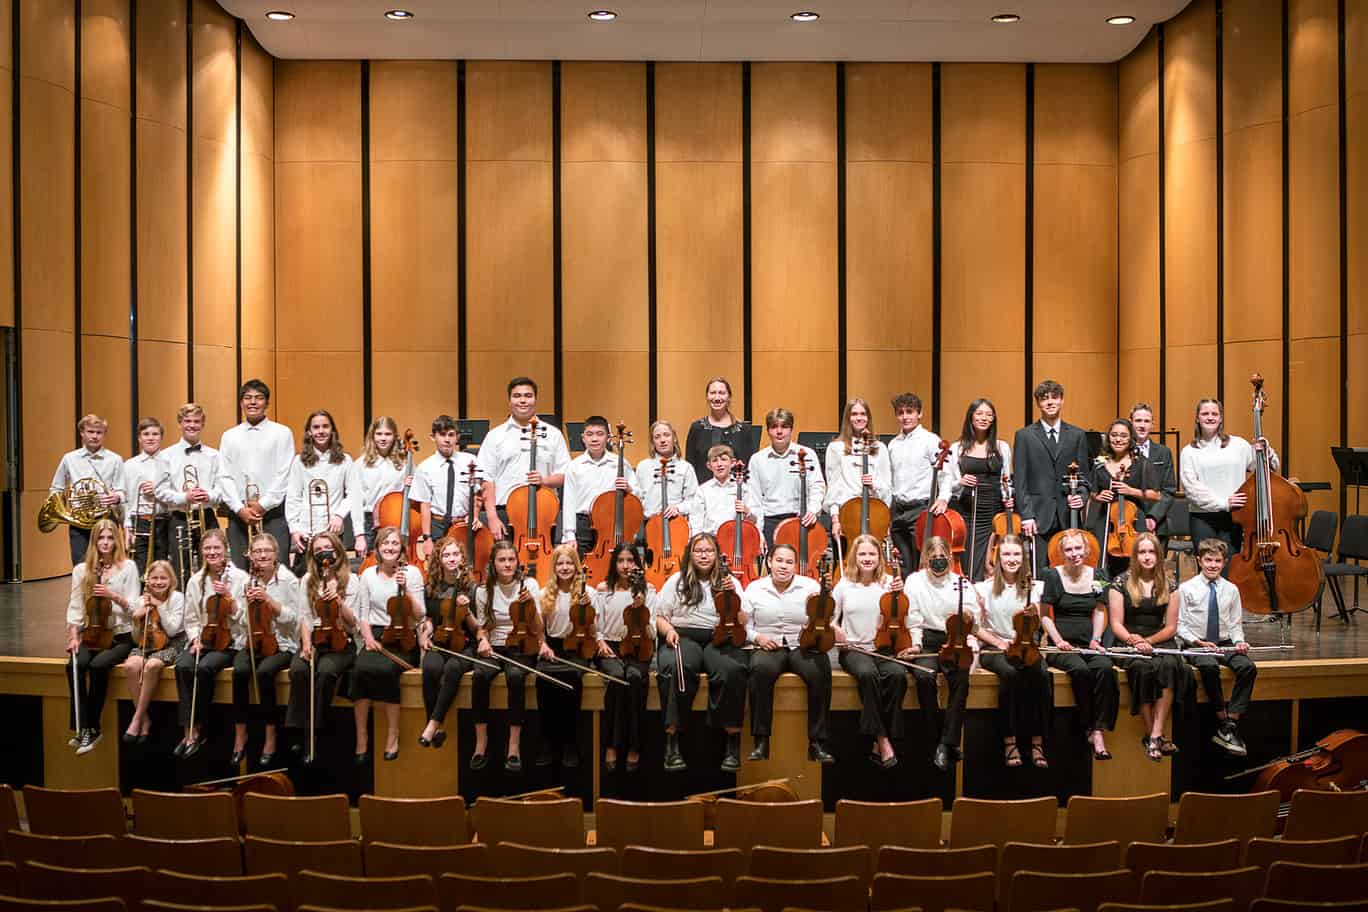 A large group of orchestra students posed for a portrait on stage